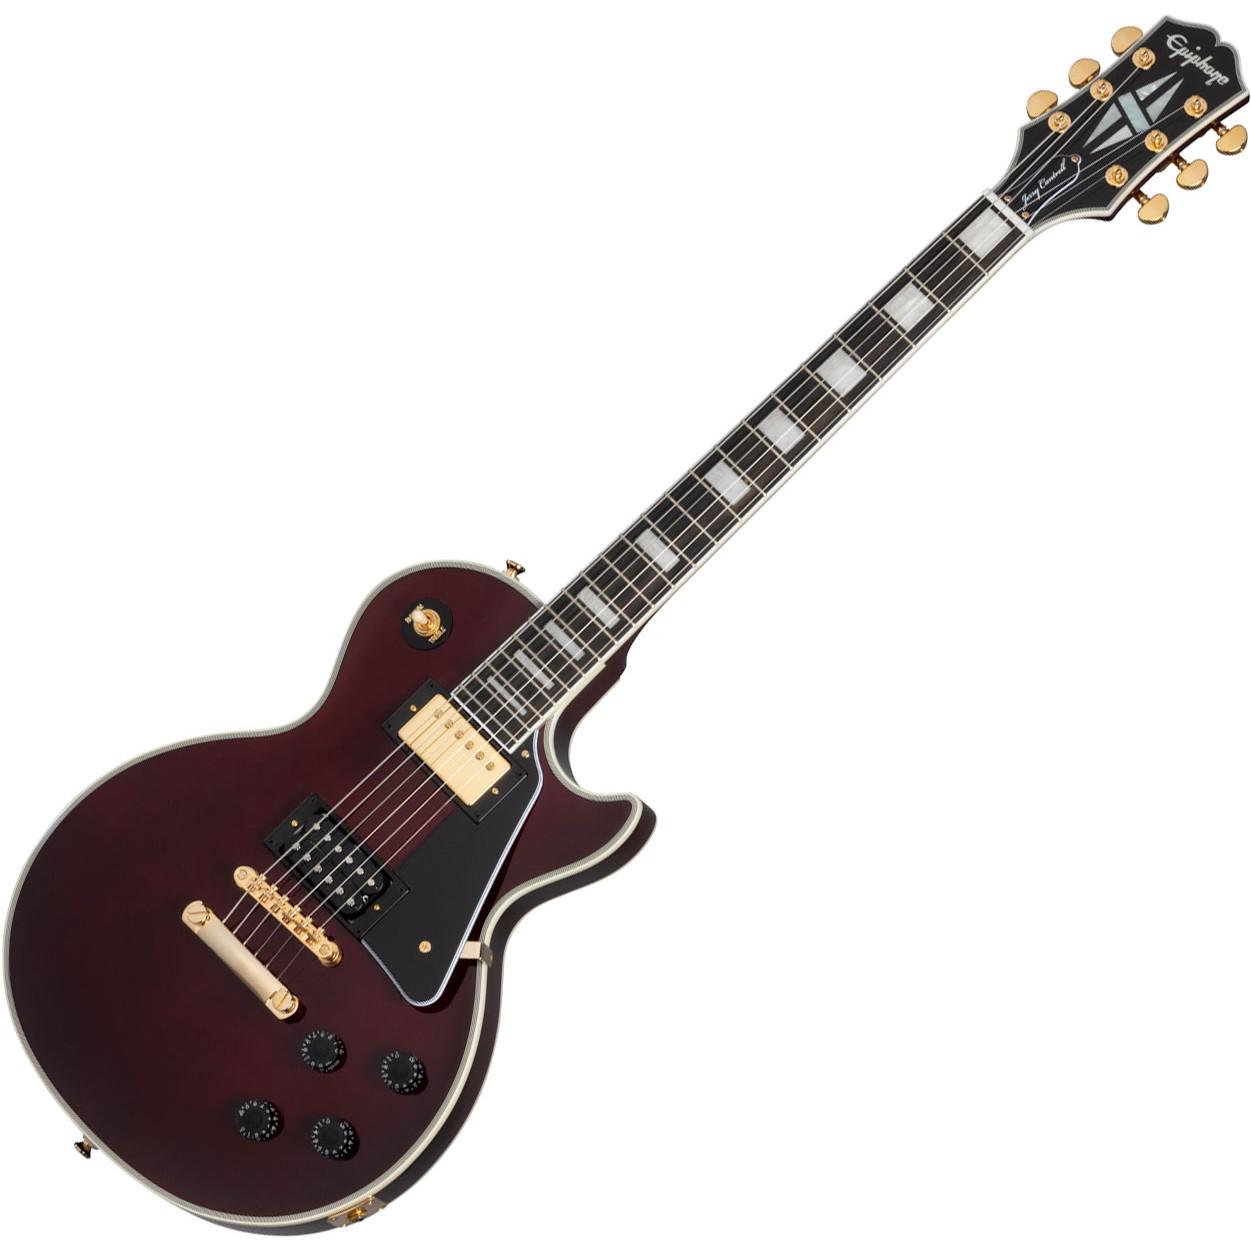 EPIPHONE Jerry Cantrell Wino Les Paul Custom